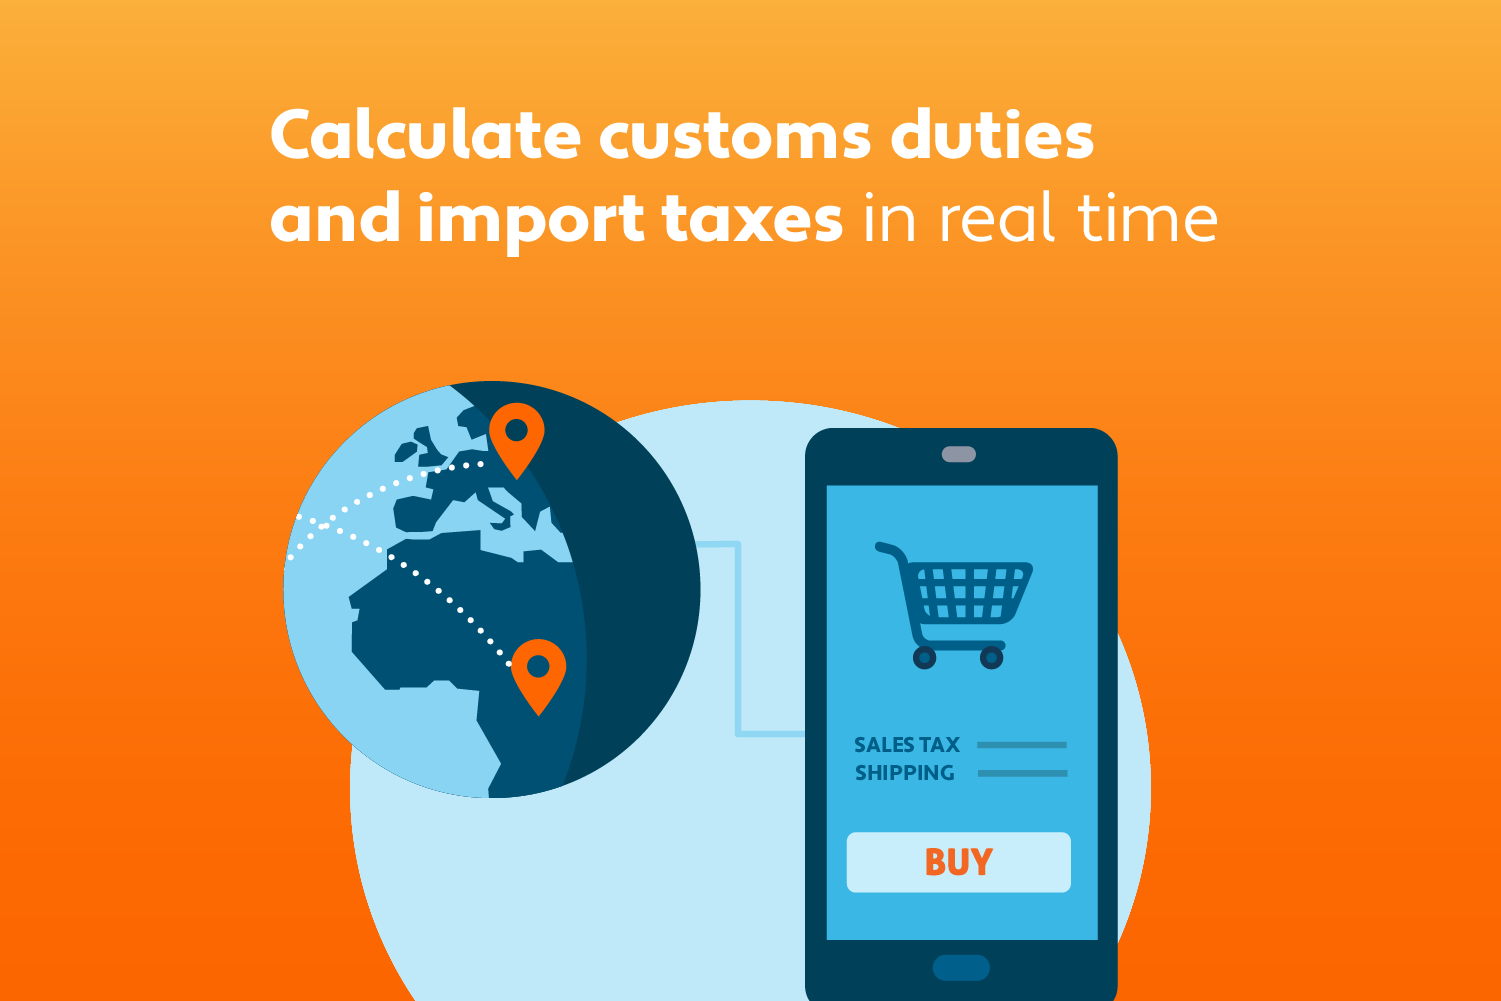 Duties and import taxes